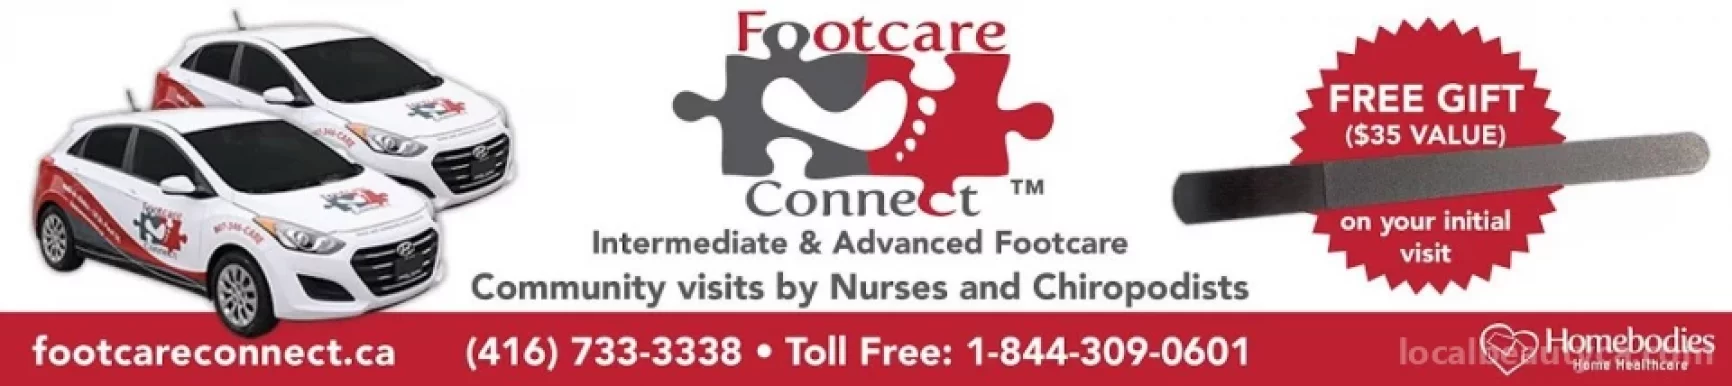 Footcare Connect, Toronto - 